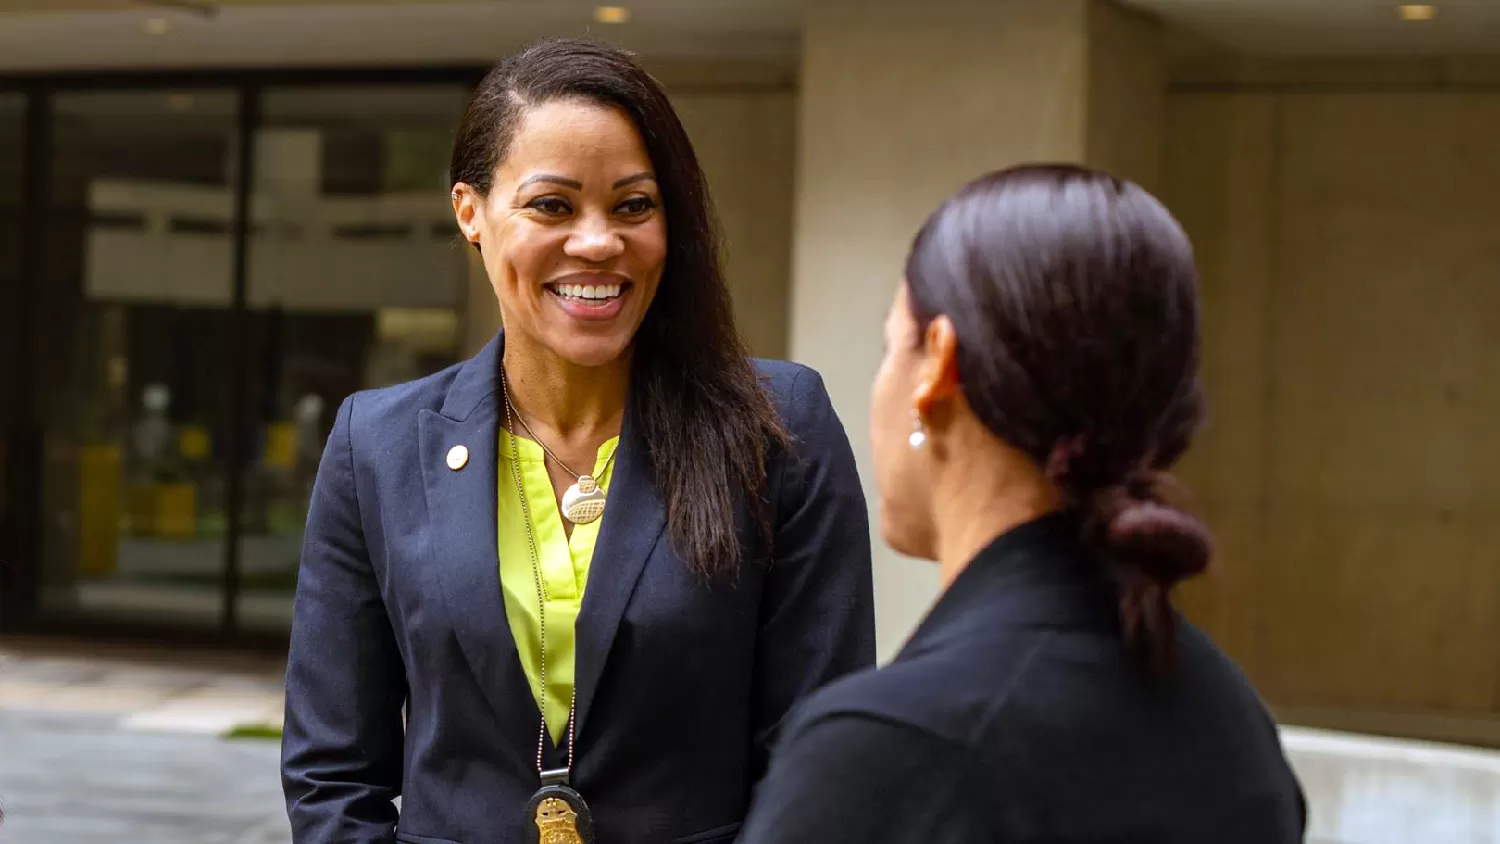 Female FBI Agent smiling and speaking to female